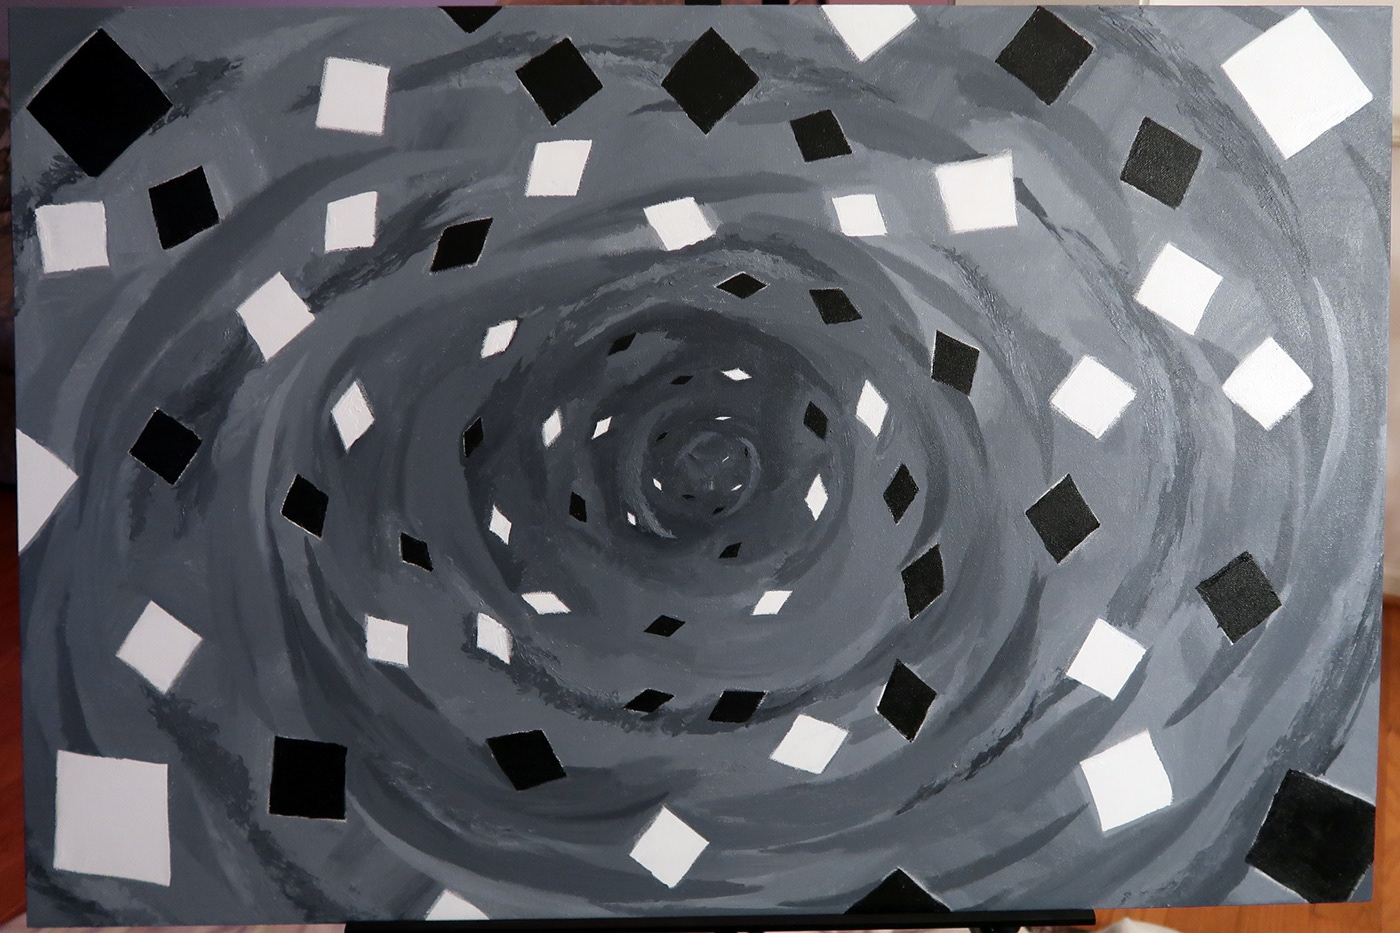 gray painting   diamonds Spiral distant geomtry Curvature yin yang balance